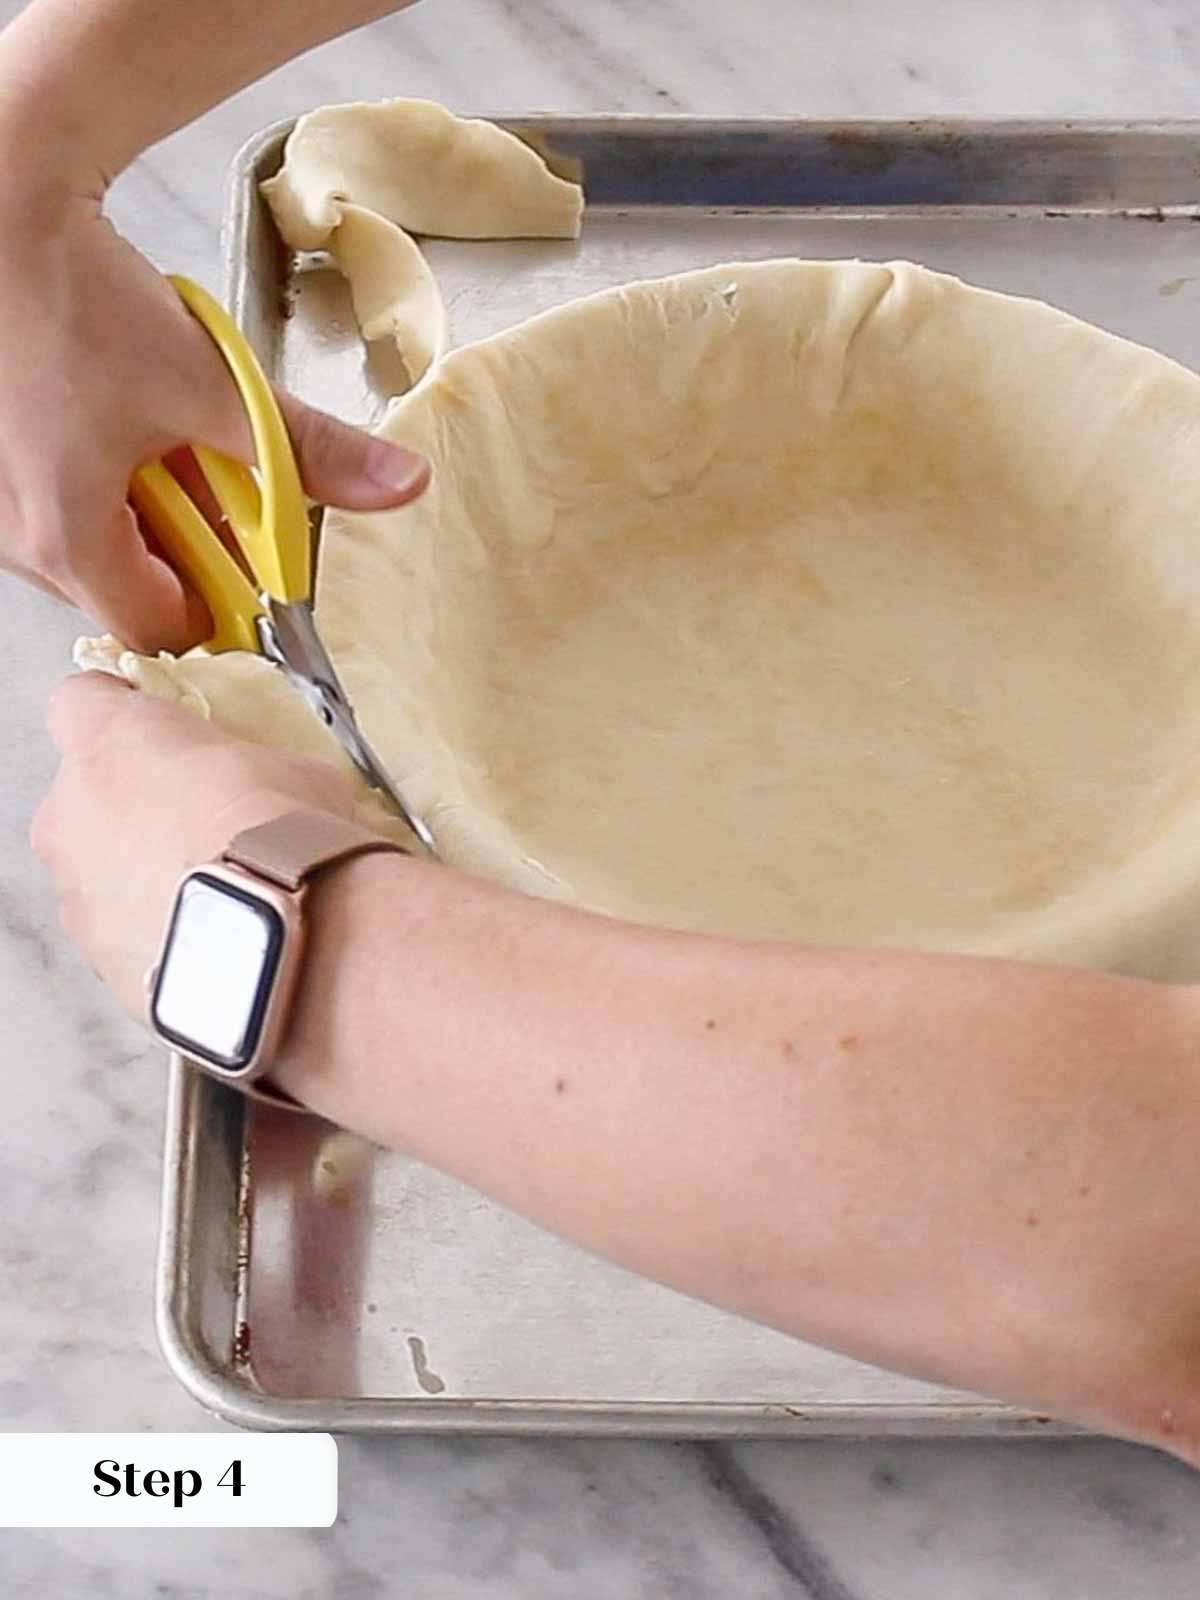 trimming excess dough from pie with scissors.